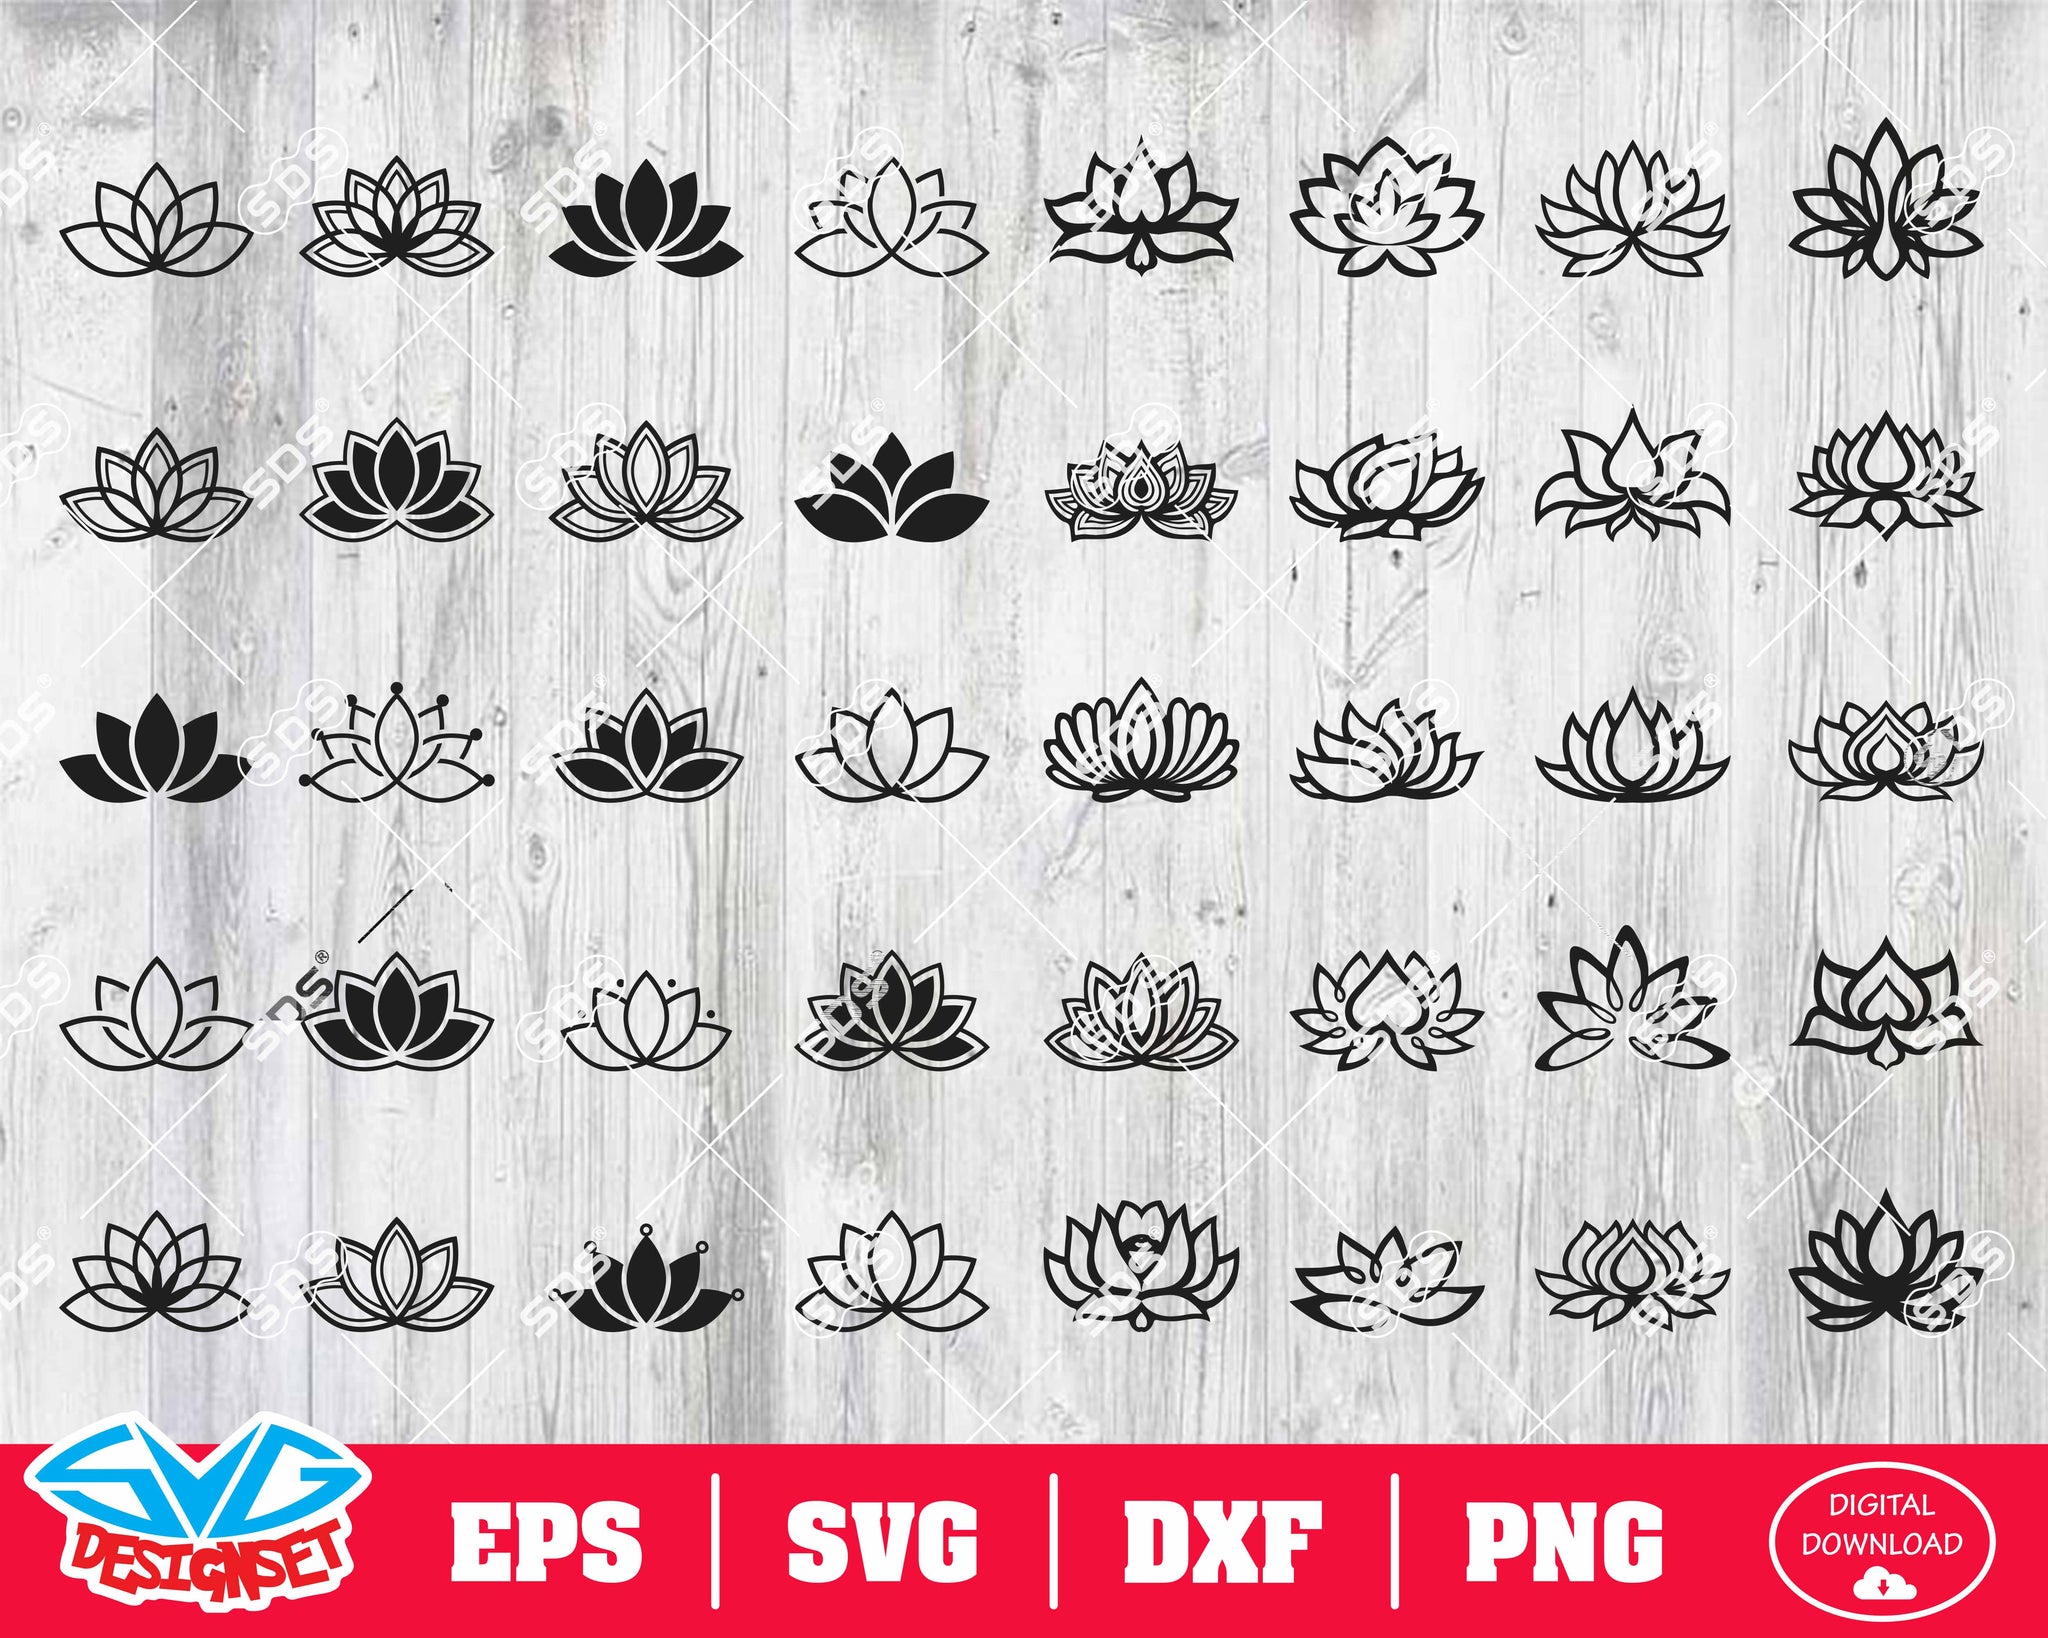 Lotus Svg, Dxf, Eps, Png, Clipart, Silhouette and Cutfiles - SVGDesignSets